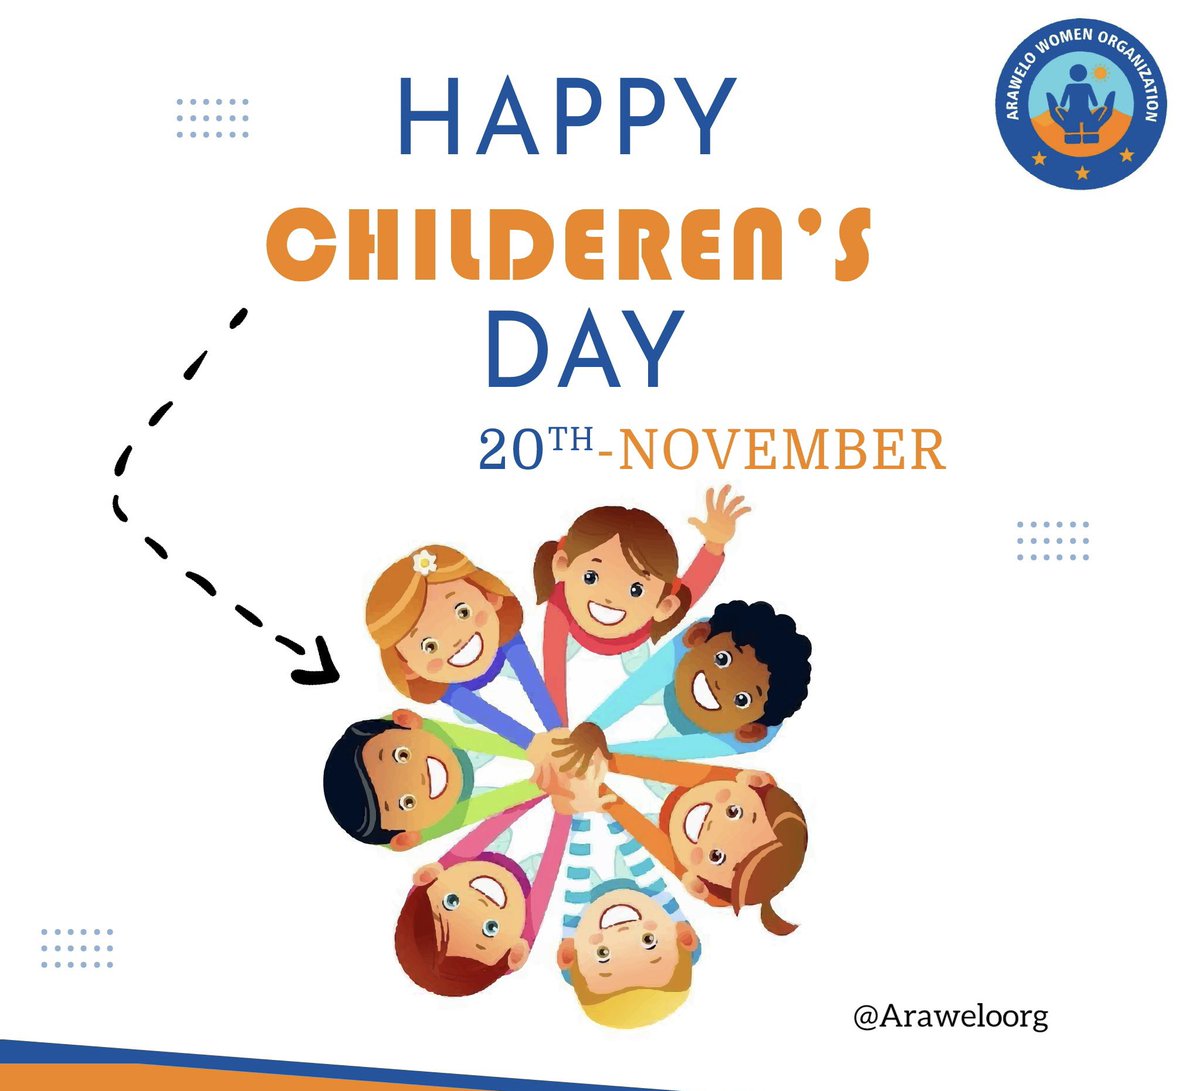 Every child deserves to grow with love and care and every child in everywhere has right to leave in peace.

 #childrenrightsarehumanrights #internationalchildrenday